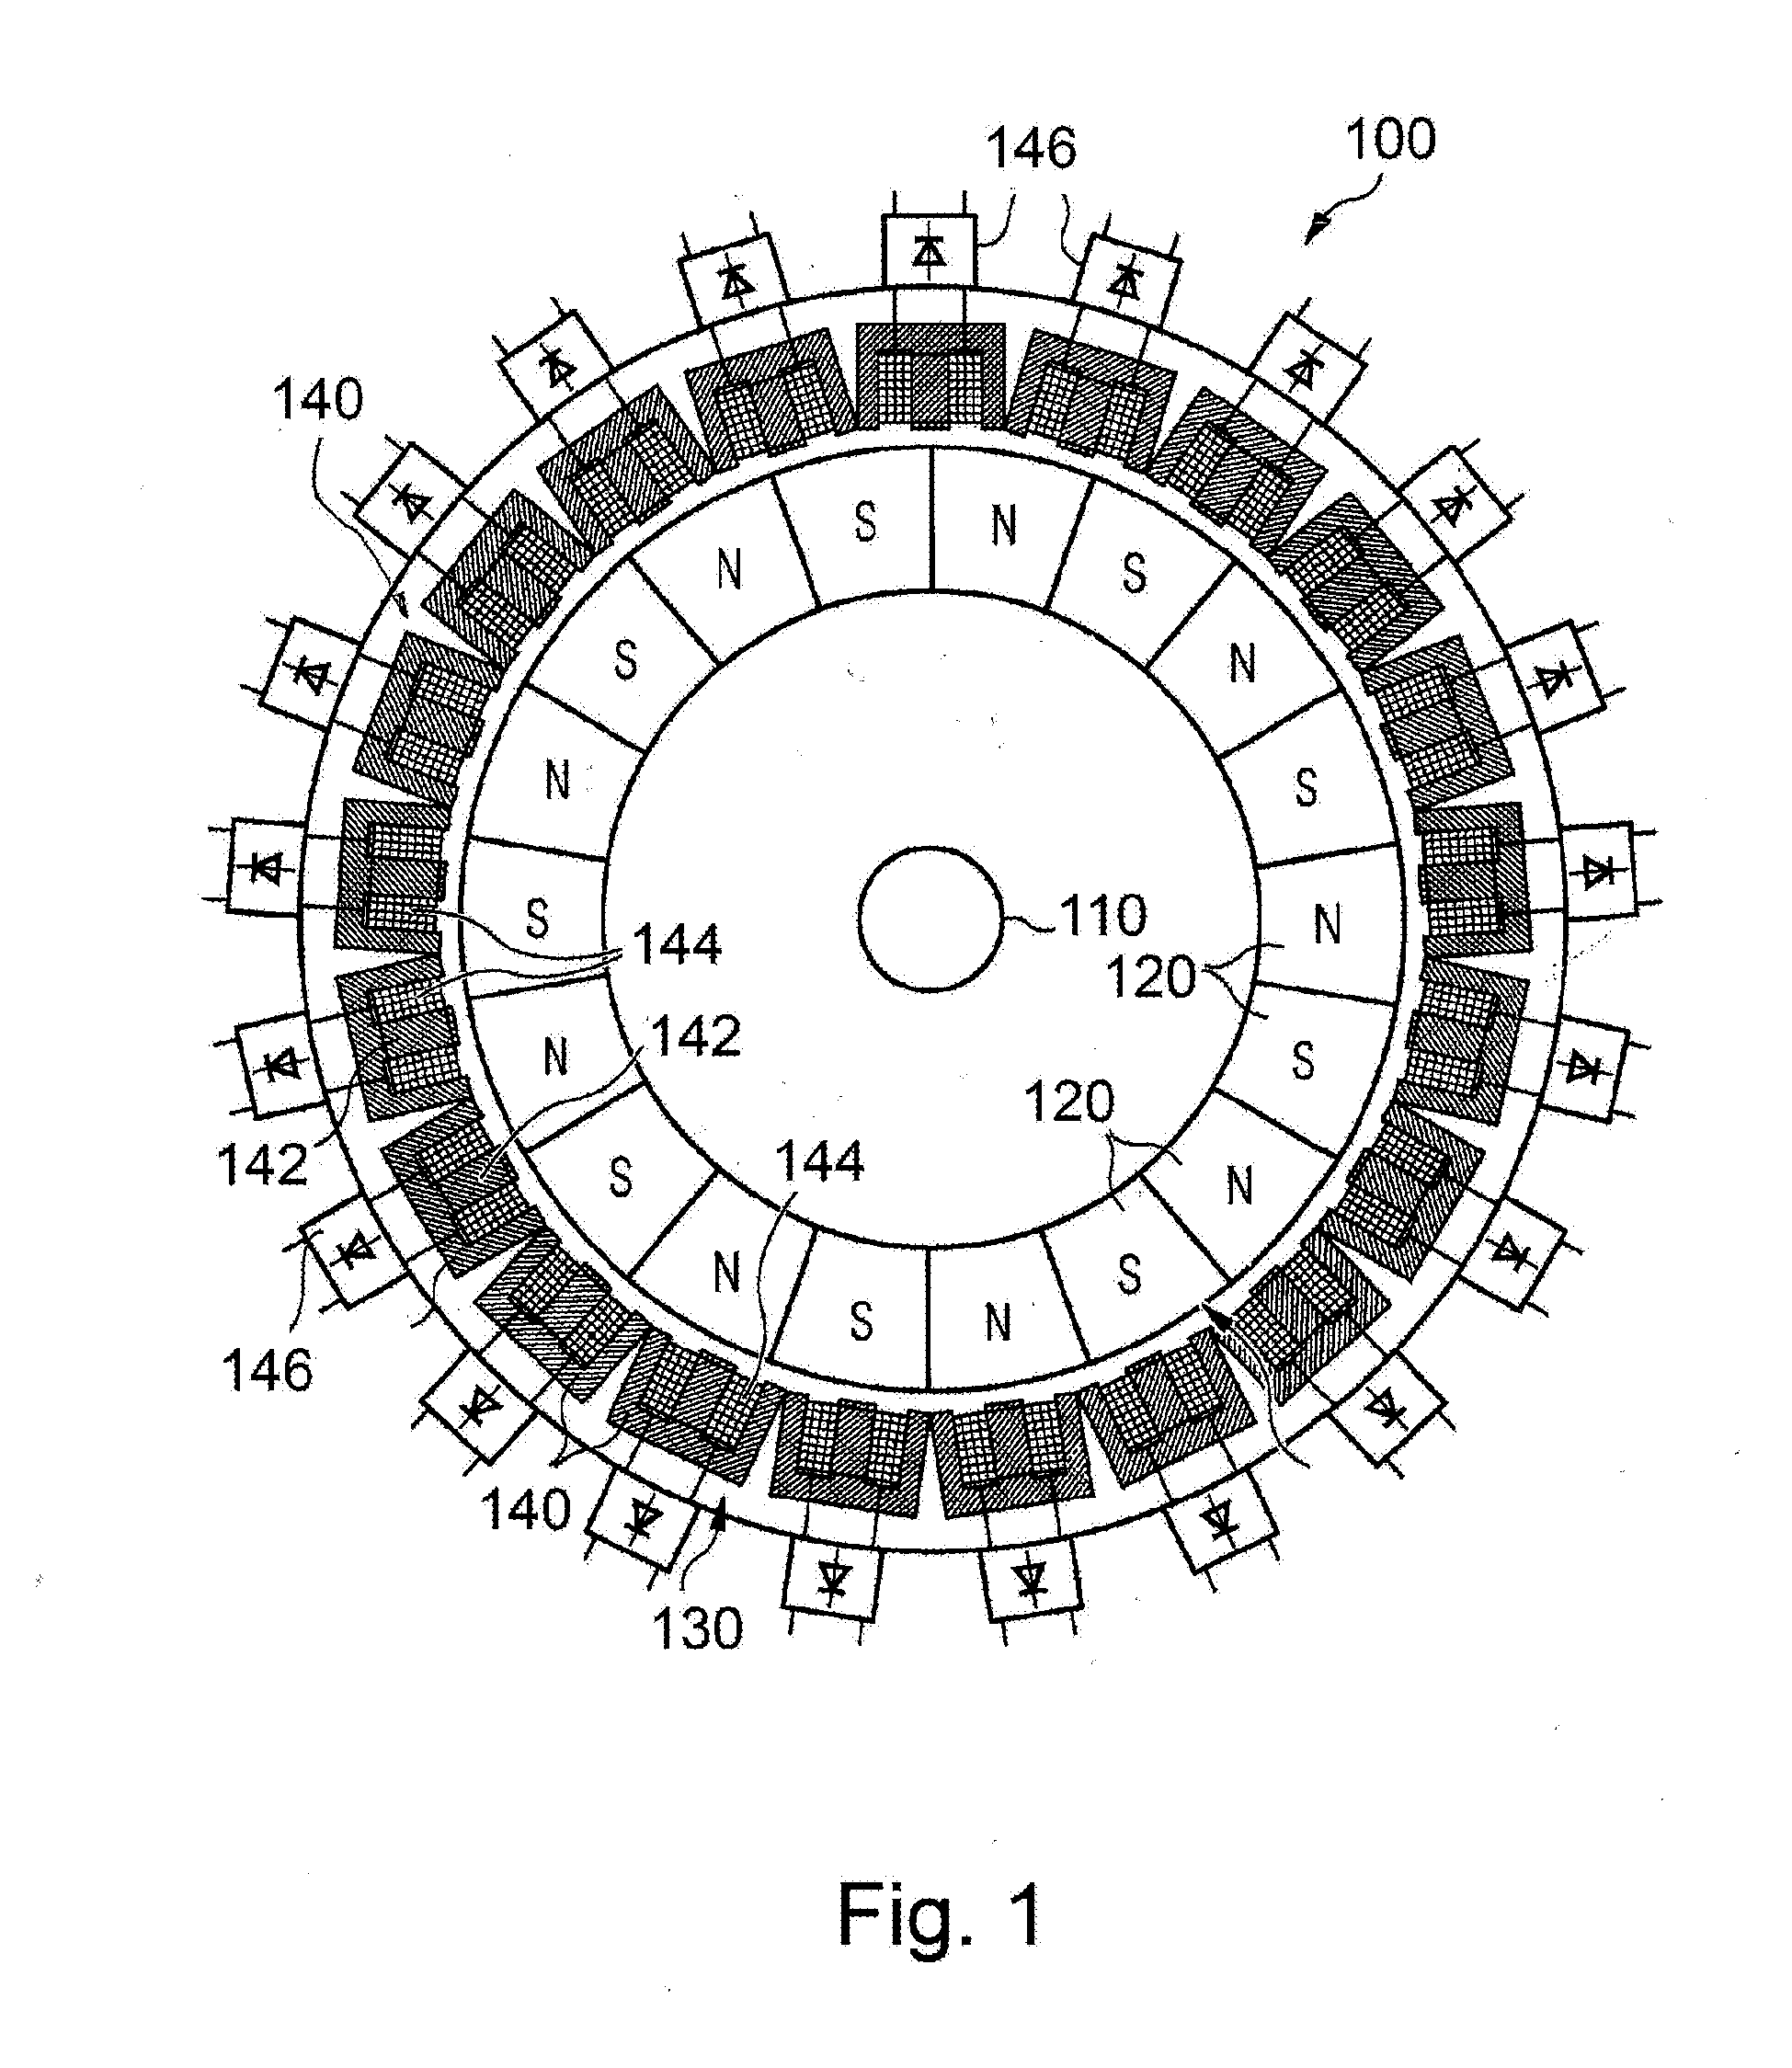 Magnetostatic Voltage/Current Limiting System for Wind Turbine Generator Comprising the Same